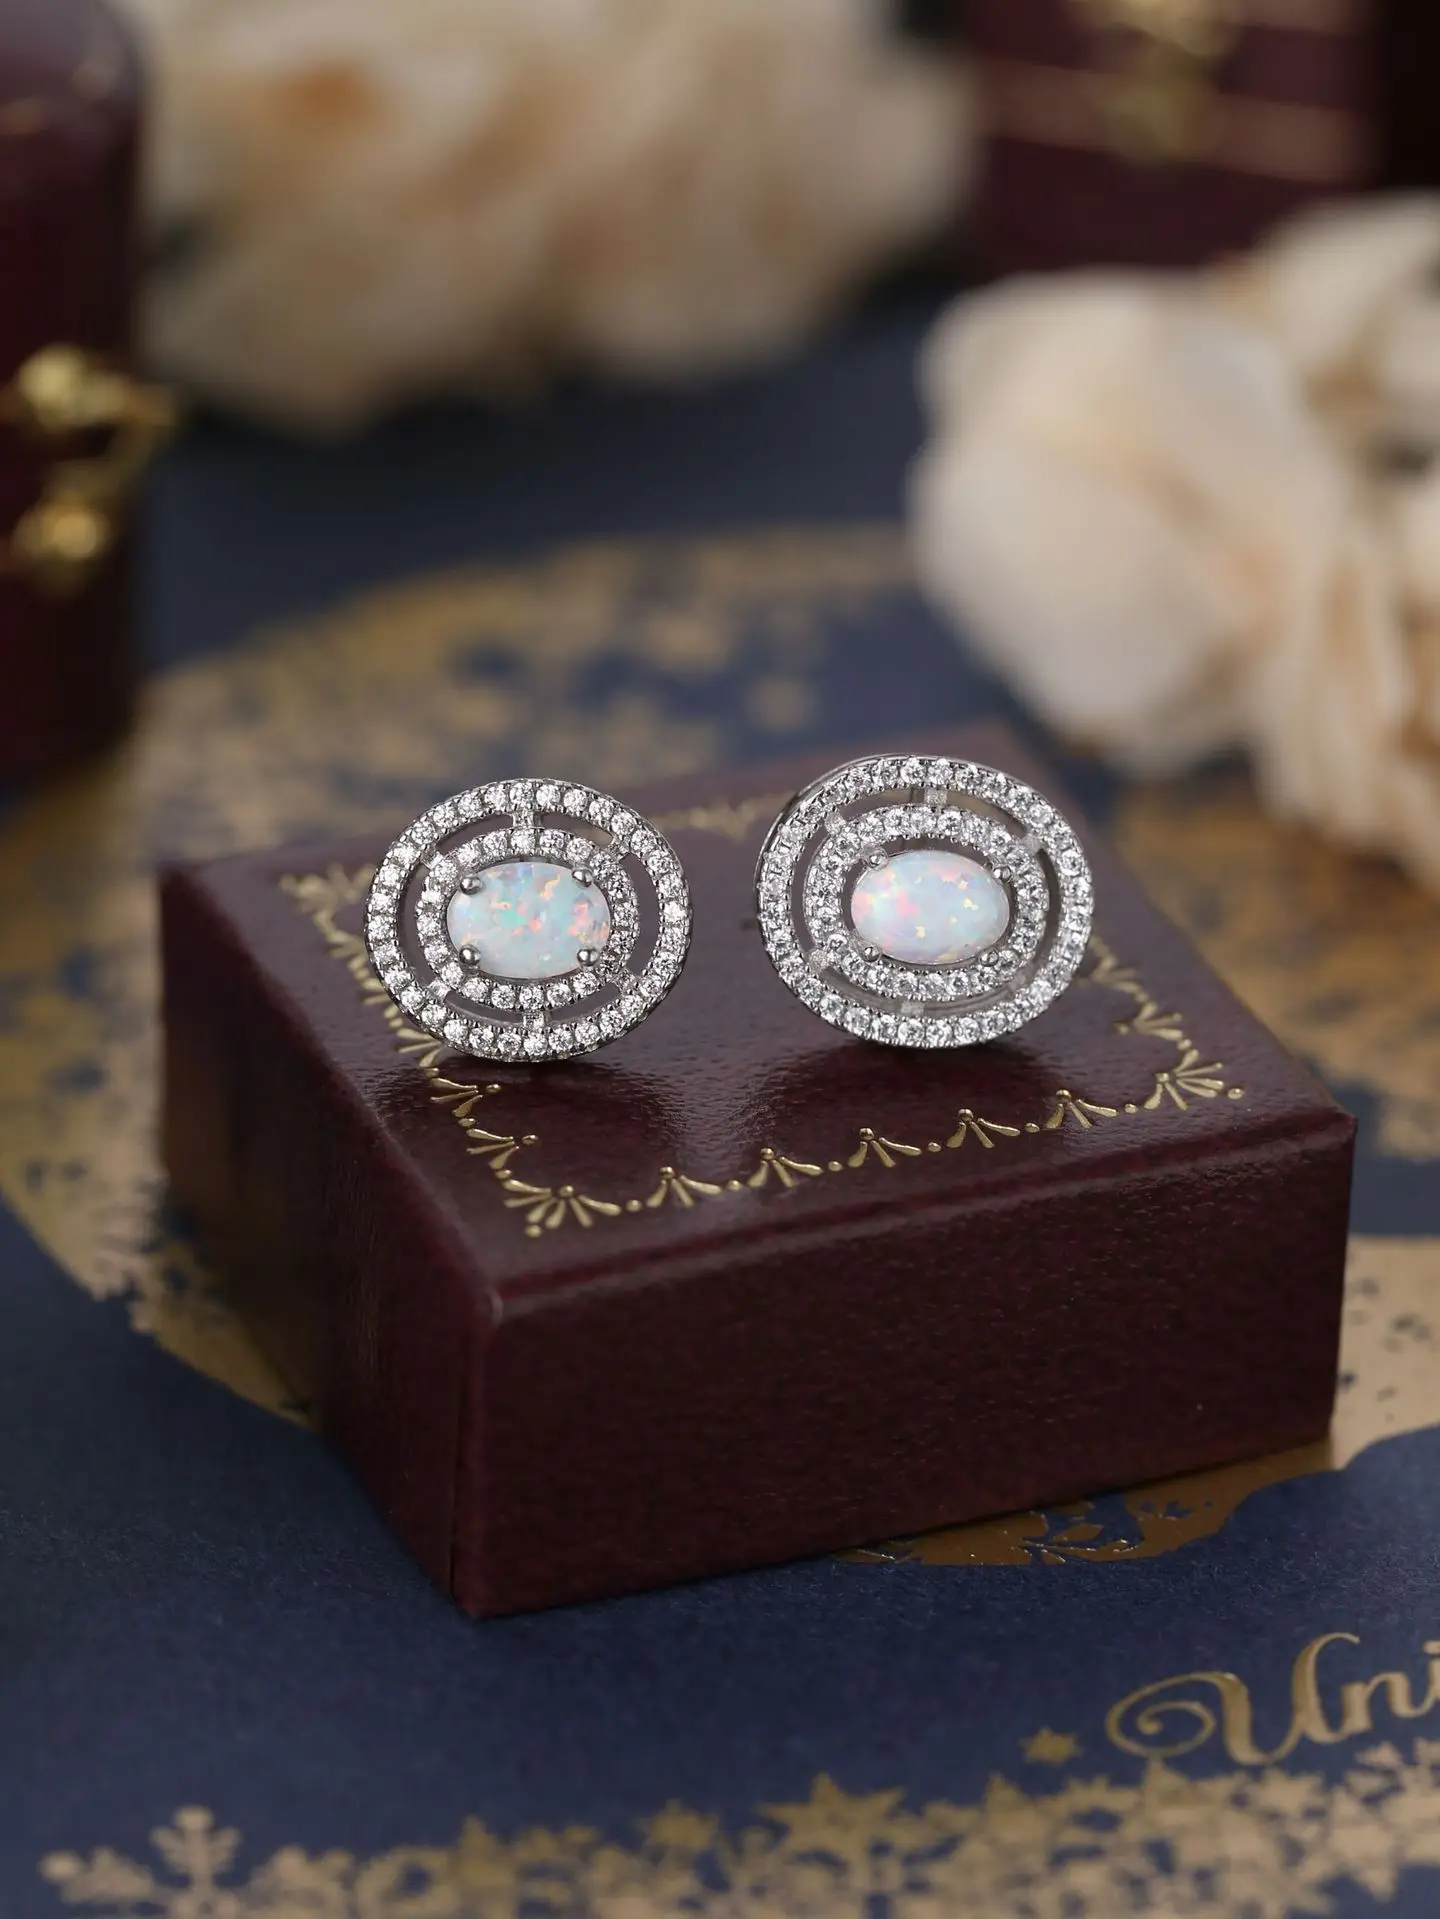 

Hot selling S925 sterling silver Aubao earrings in Europe and America, versatile and fashionable gemstone earrings for women